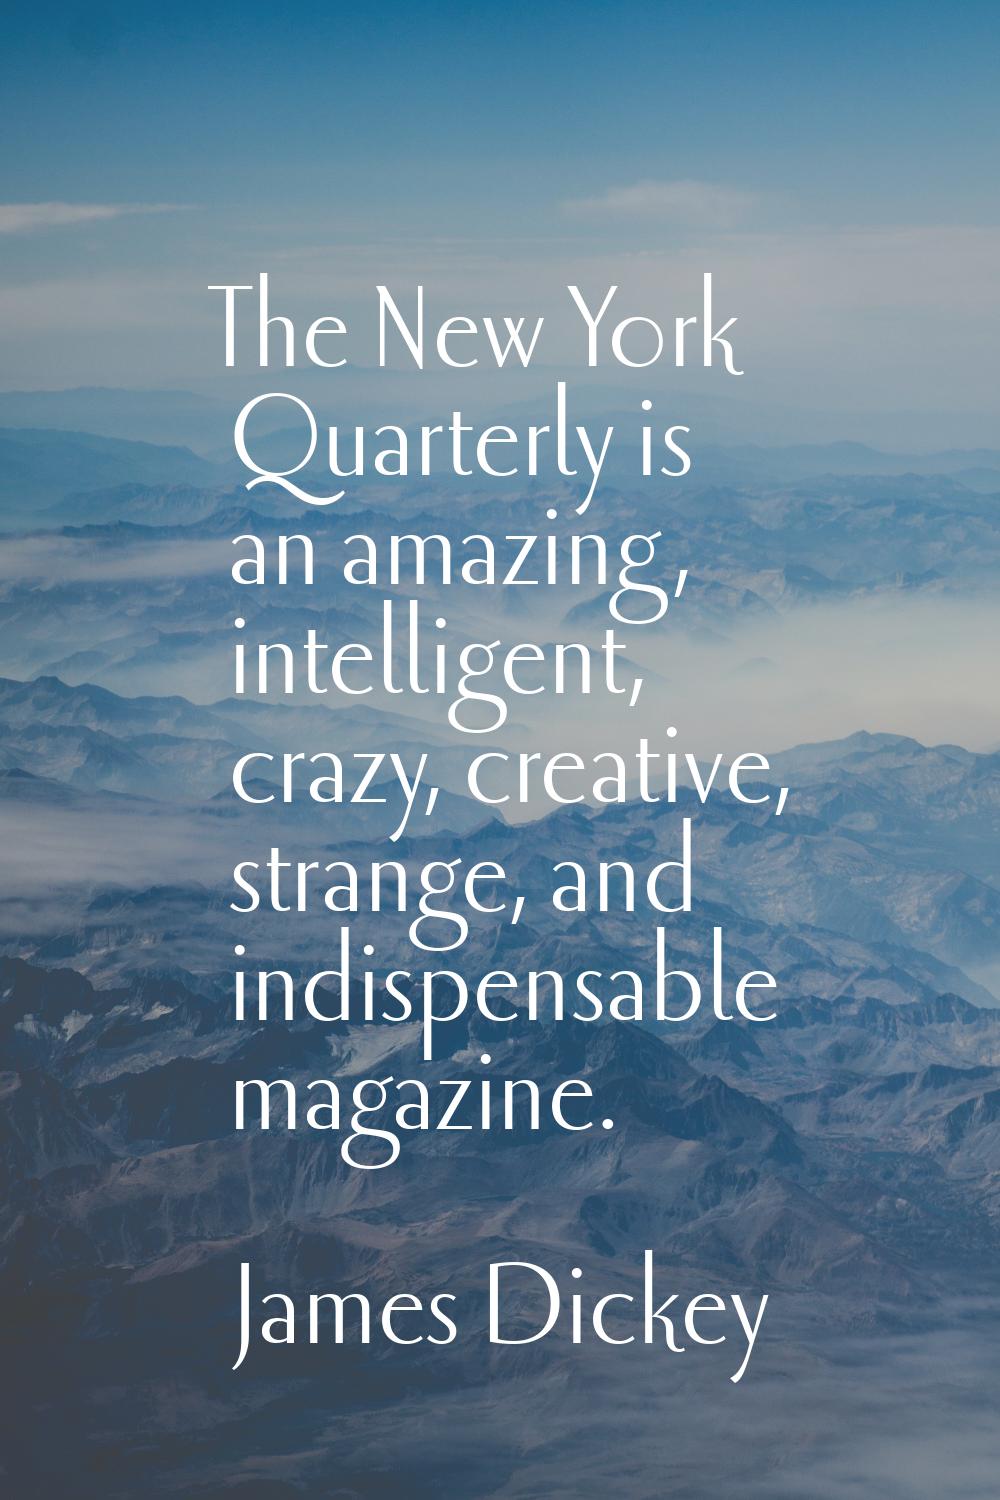 The New York Quarterly is an amazing, intelligent, crazy, creative, strange, and indispensable maga